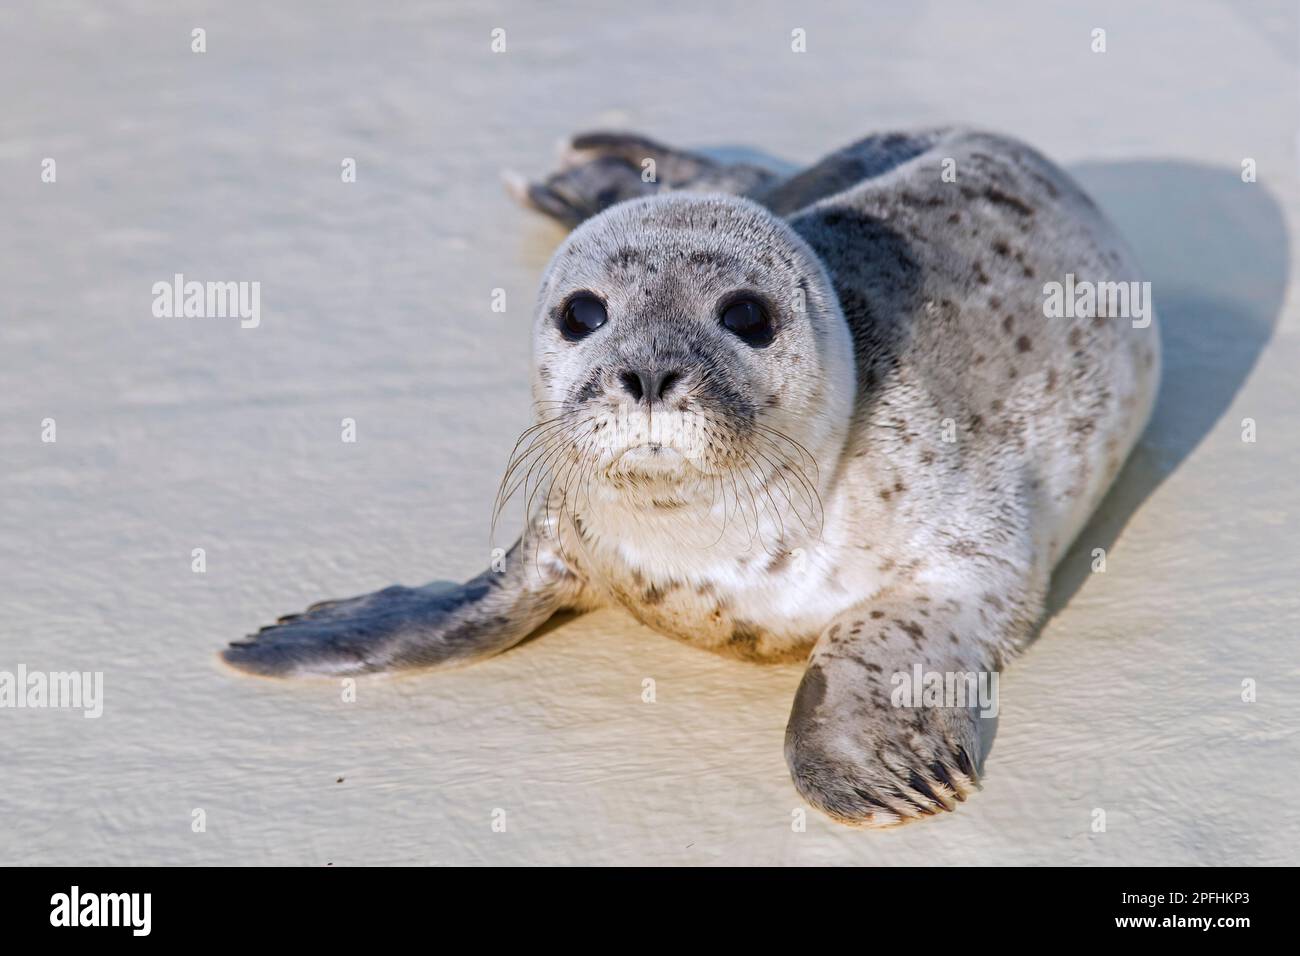 Orphaned common seal / harbour seal (Phoca vitulina) orphan pup at the Friedrichskoog Seal Station at Dithmarschen, Schleswig-Holstein, Germany Stock Photo